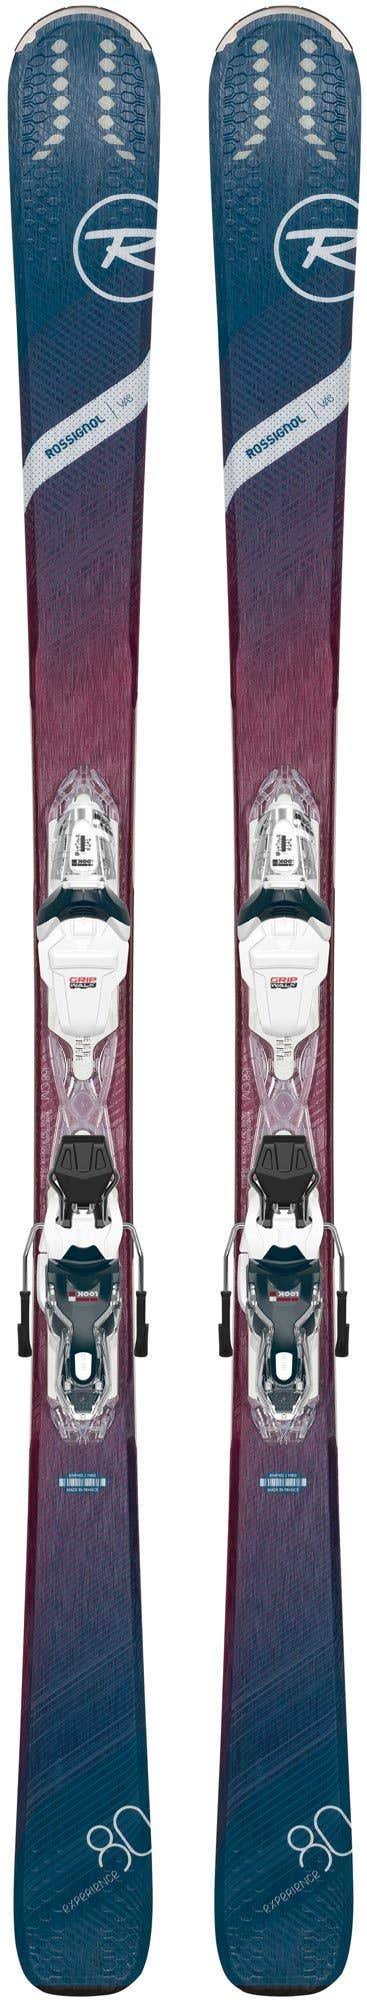 Rossignol Women's All Mountain Skis Experience 80 Ci W (xpress)